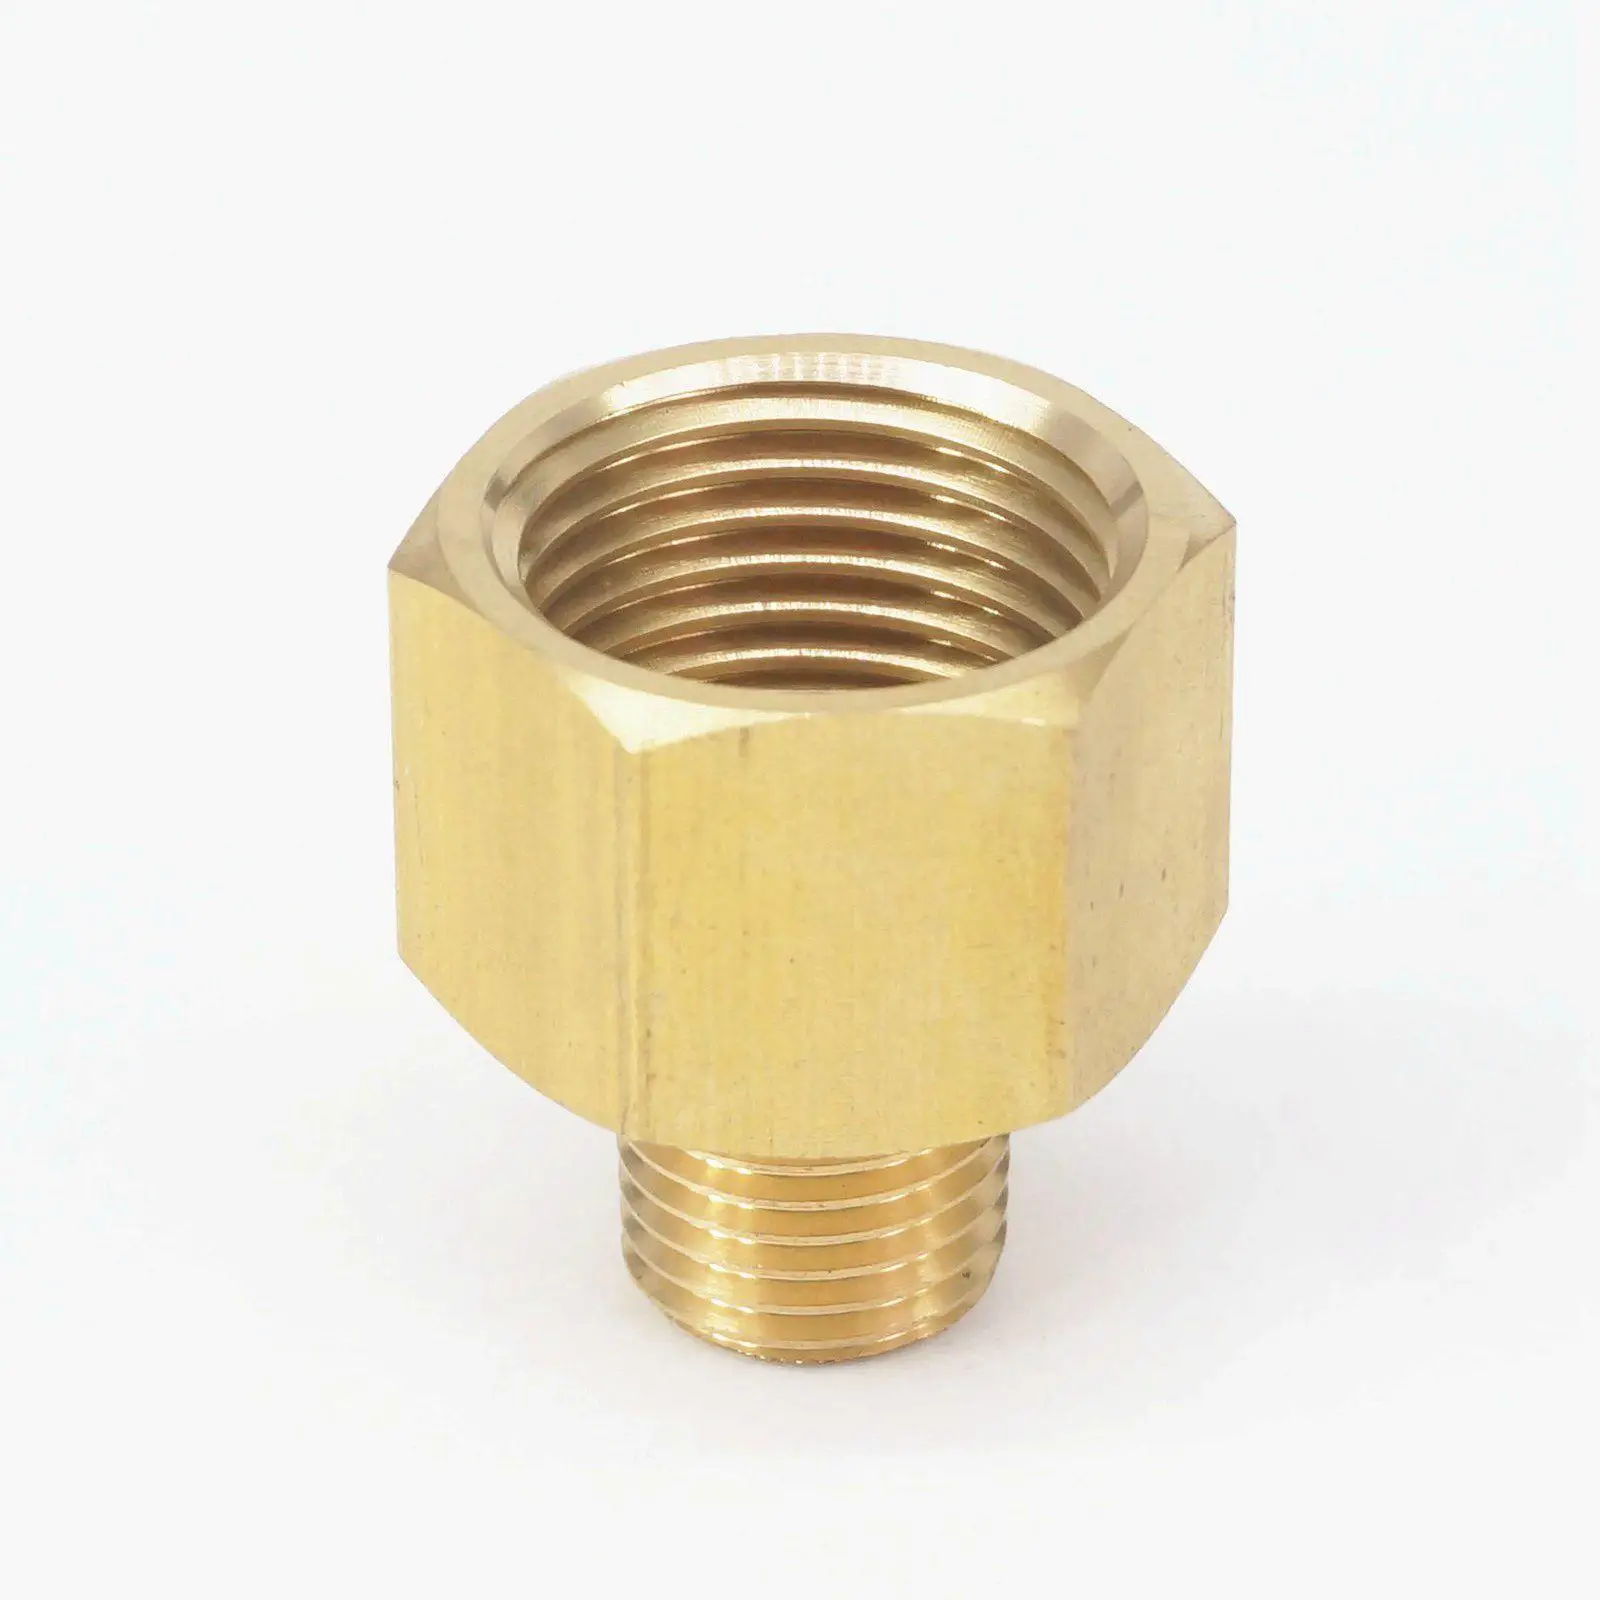 Oil Water Gas Fuel 1/2" Female NPT 90 Degree Elbow Brass Fitting Vacuum Air 